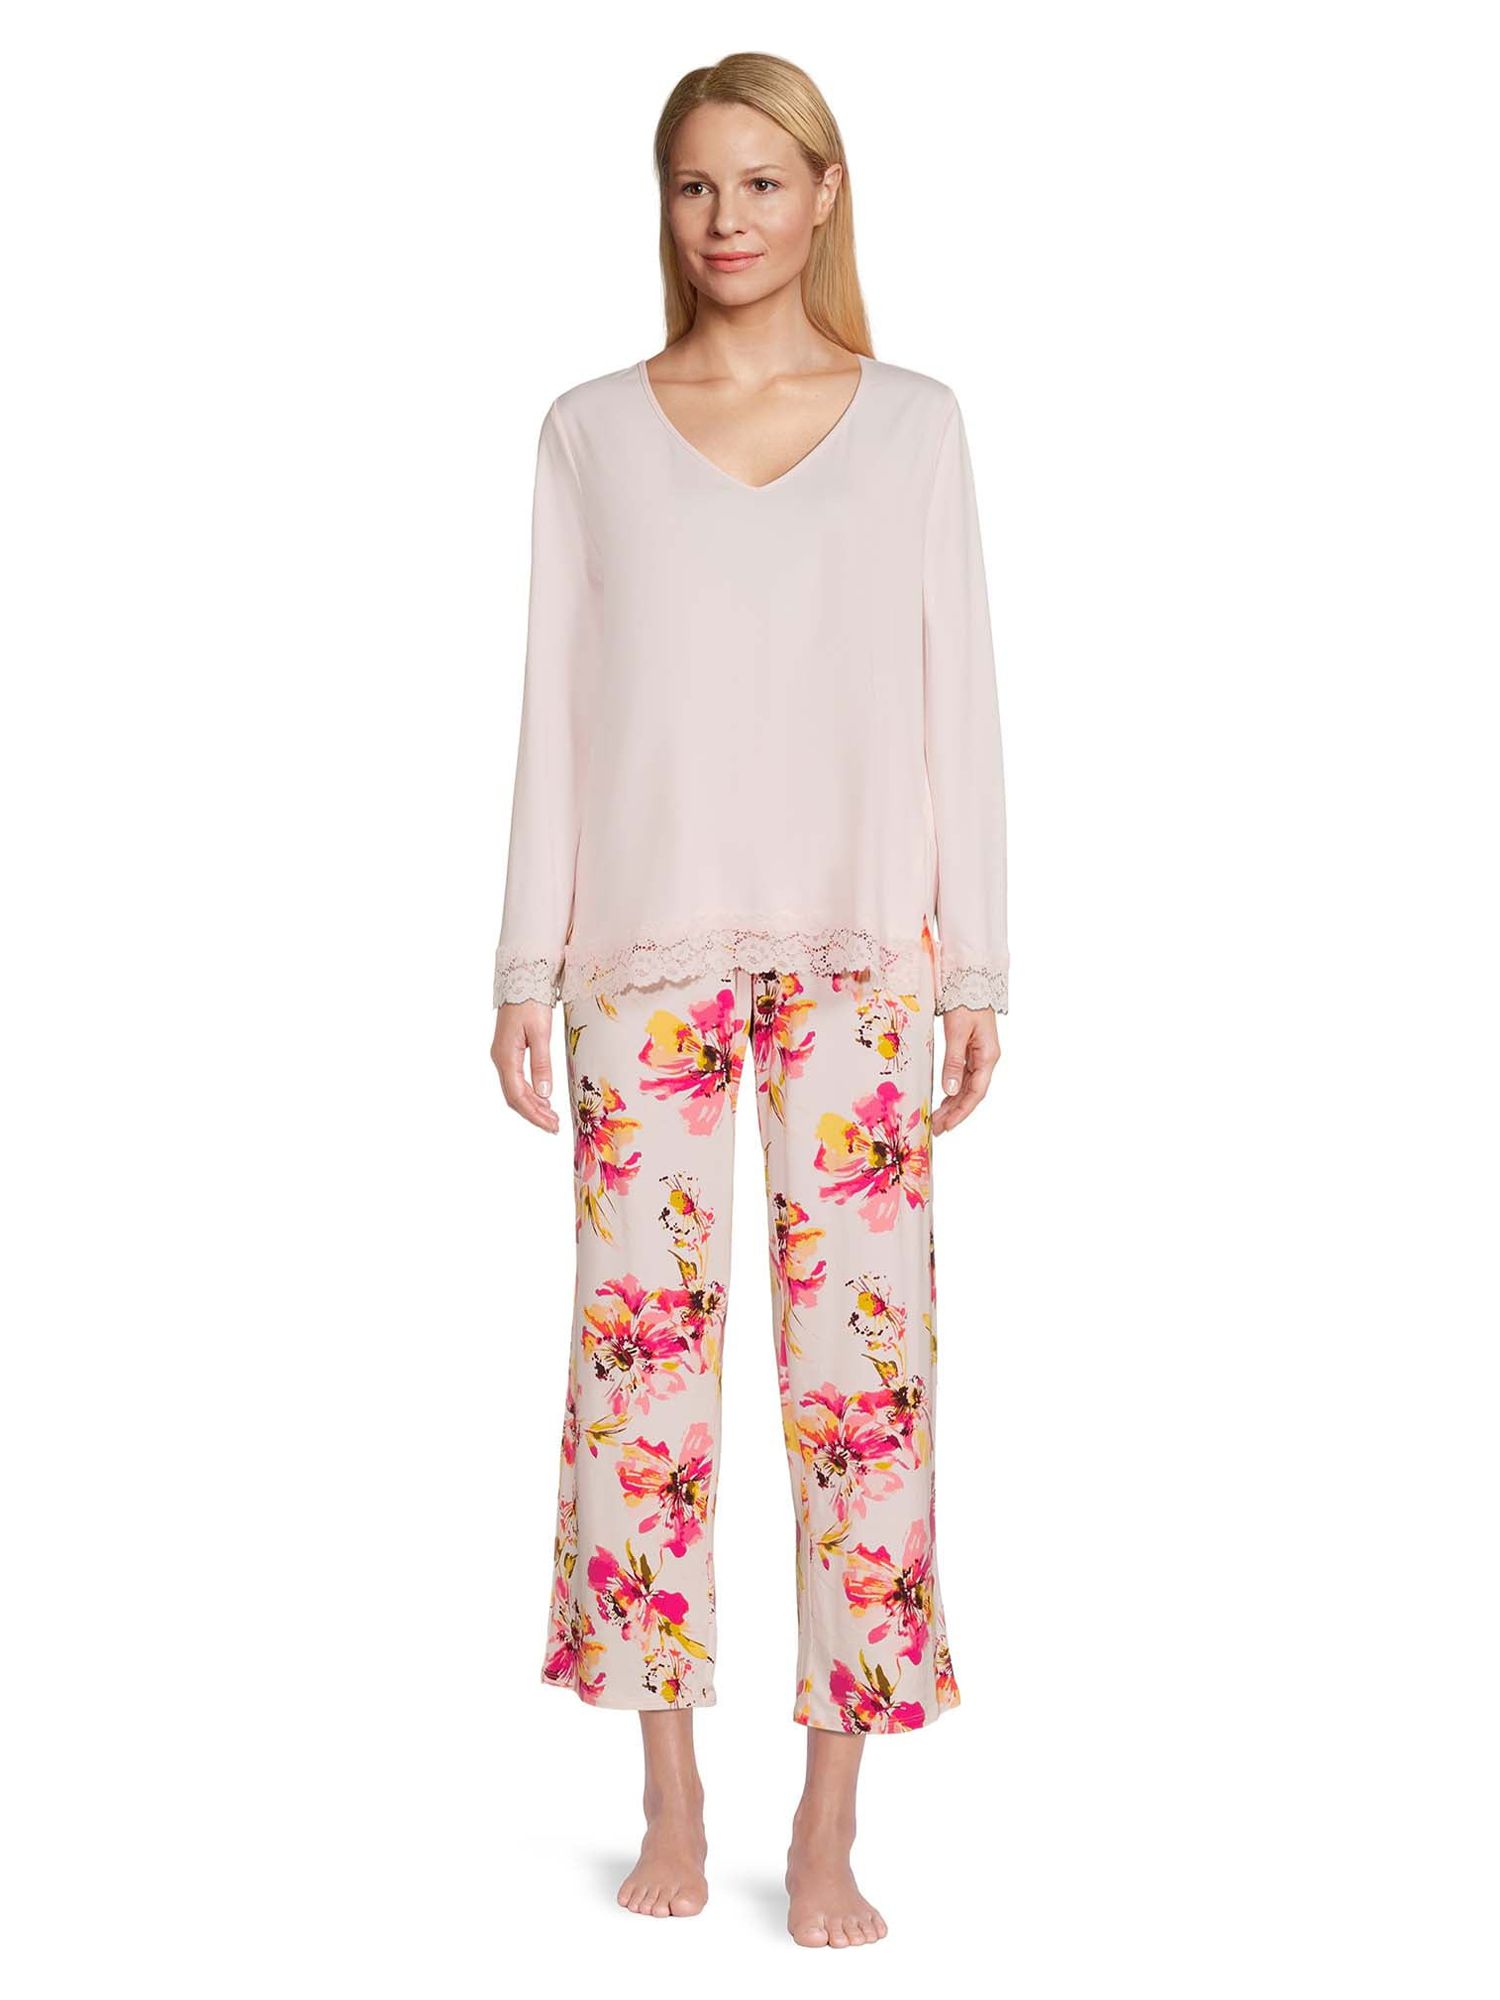 The Pioneer Woman Long Sleeve Top with Lace and Pants Pajama Set, 2-Piece, Women's - image 3 of 6